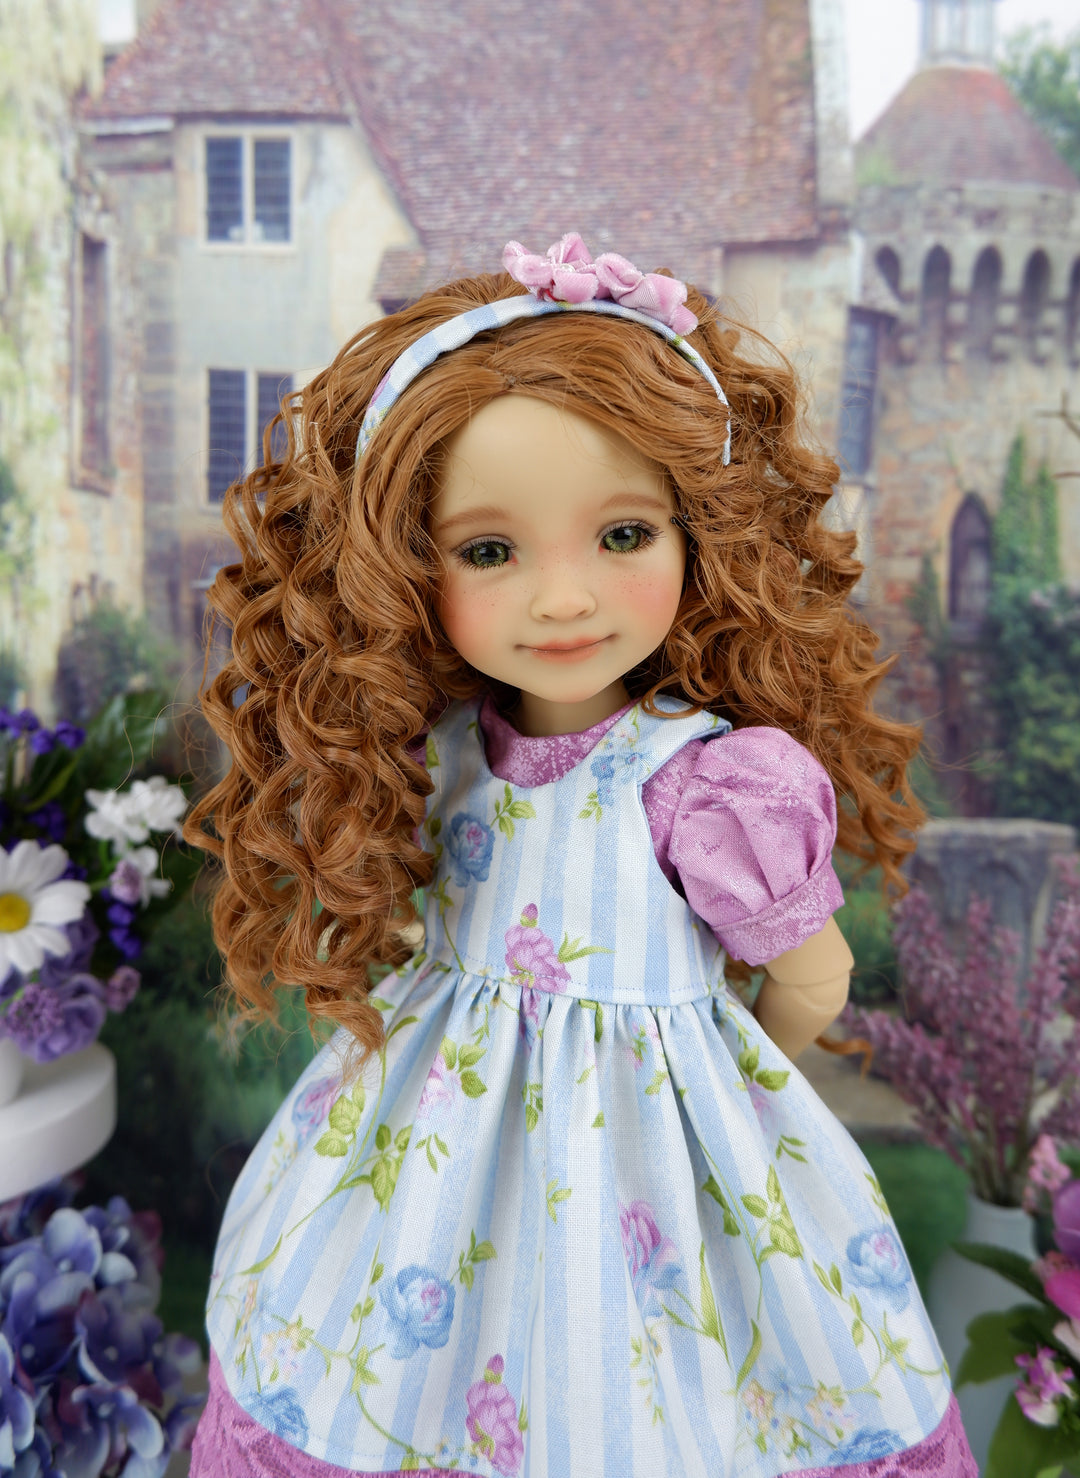 Climbing Roses - dress & pinafore with shoes for Ruby Red Fashion Friends doll